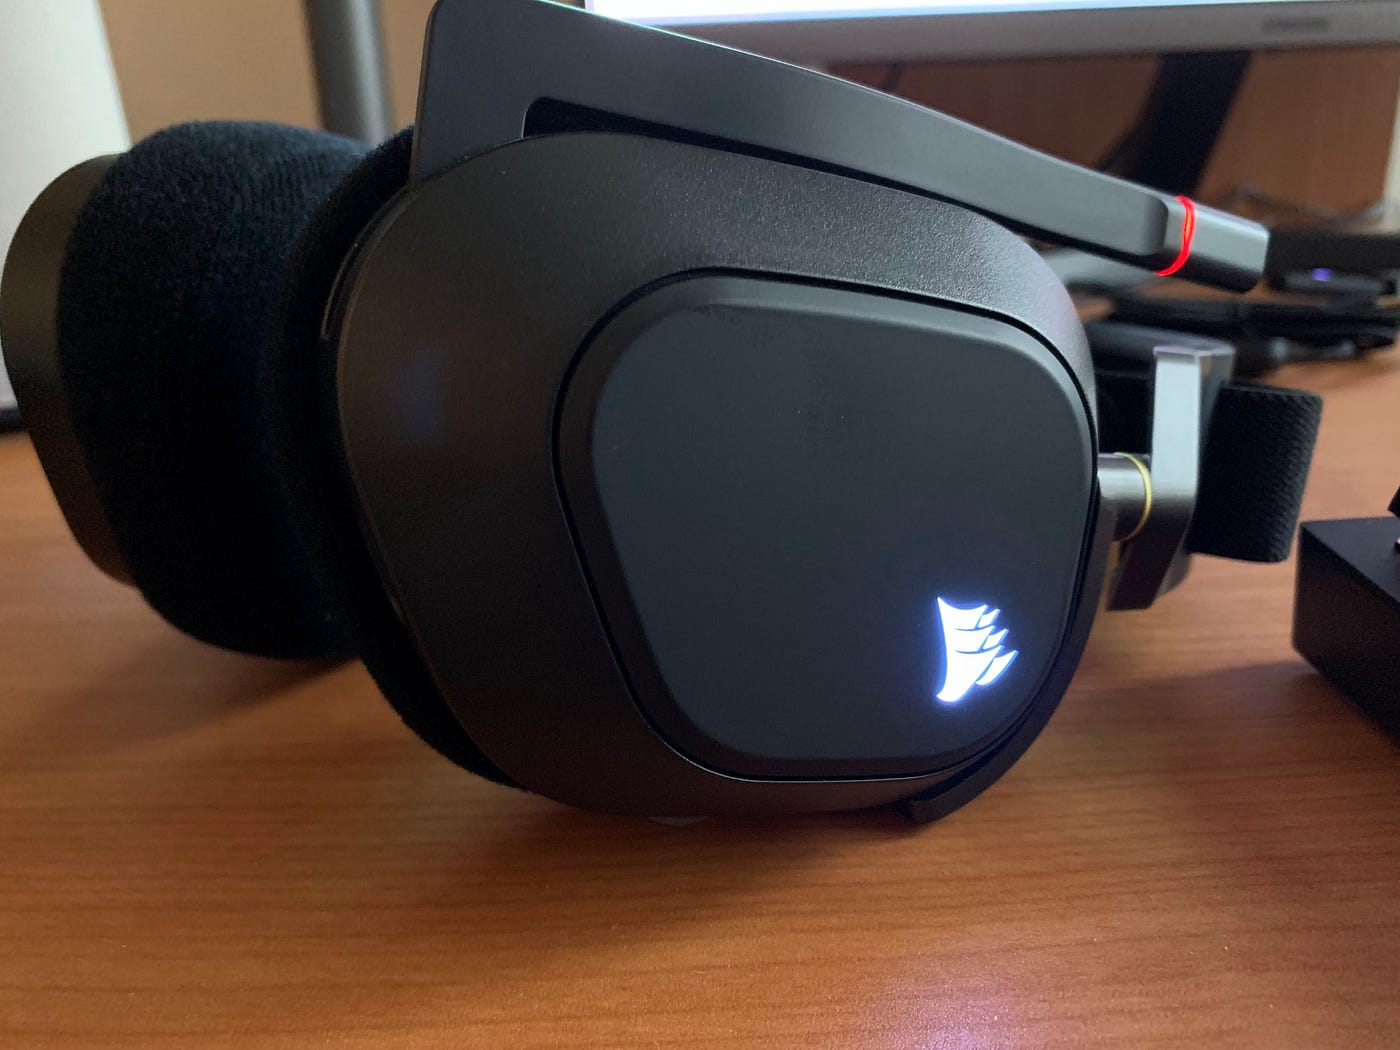 Corsair HS80 RGB USB Review - The wired mic really does make all